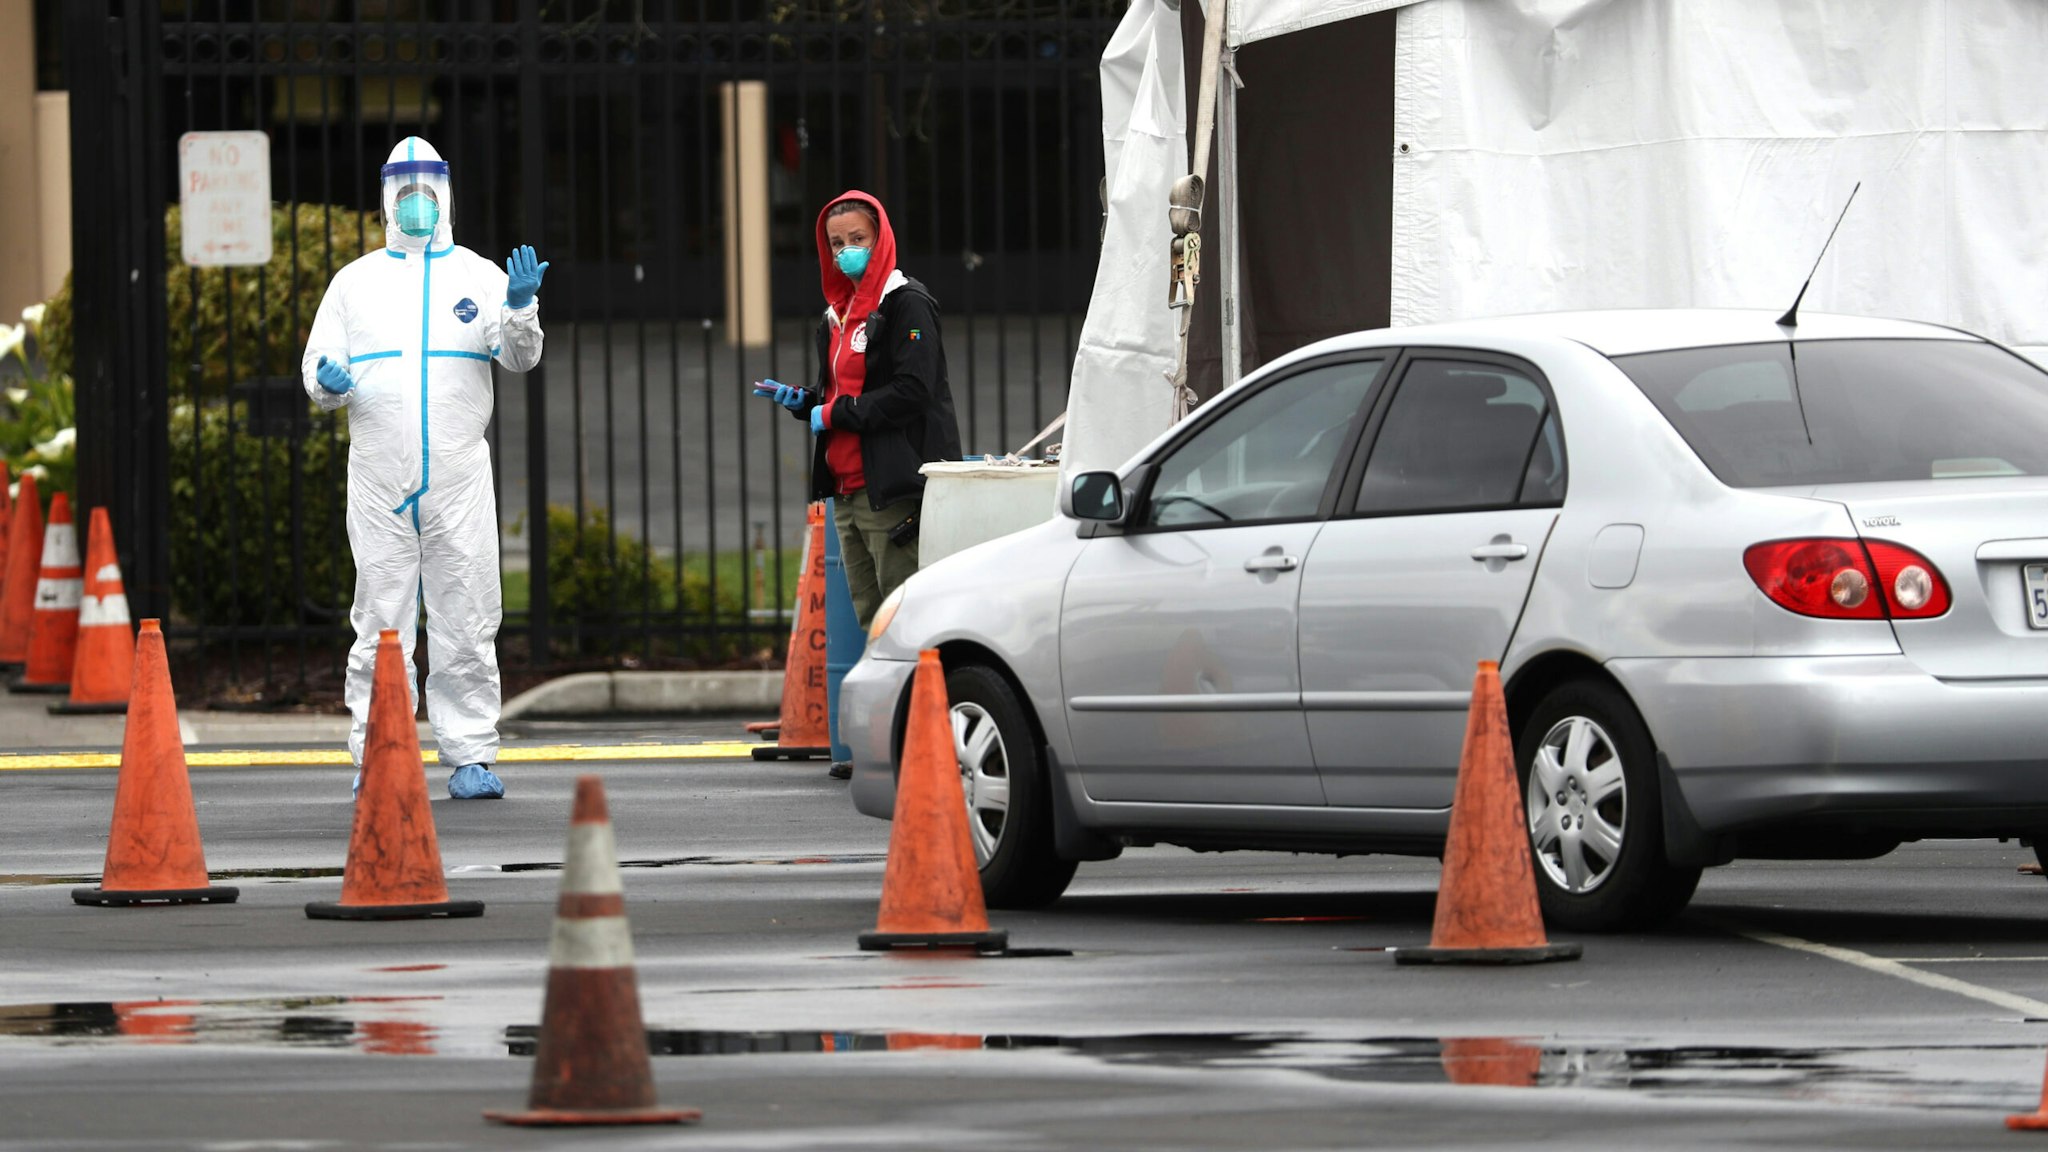 SAN MATEO, CALIFORNIA - MARCH 16: A medical worker guides a car that is going through a coronavirus drive-thru test clinic at the San Mateo County Event Center on March 16, 2020 in San Mateo, California. Drive-thru test clinics for COVID-19 are popping up across the country as more tests become available.